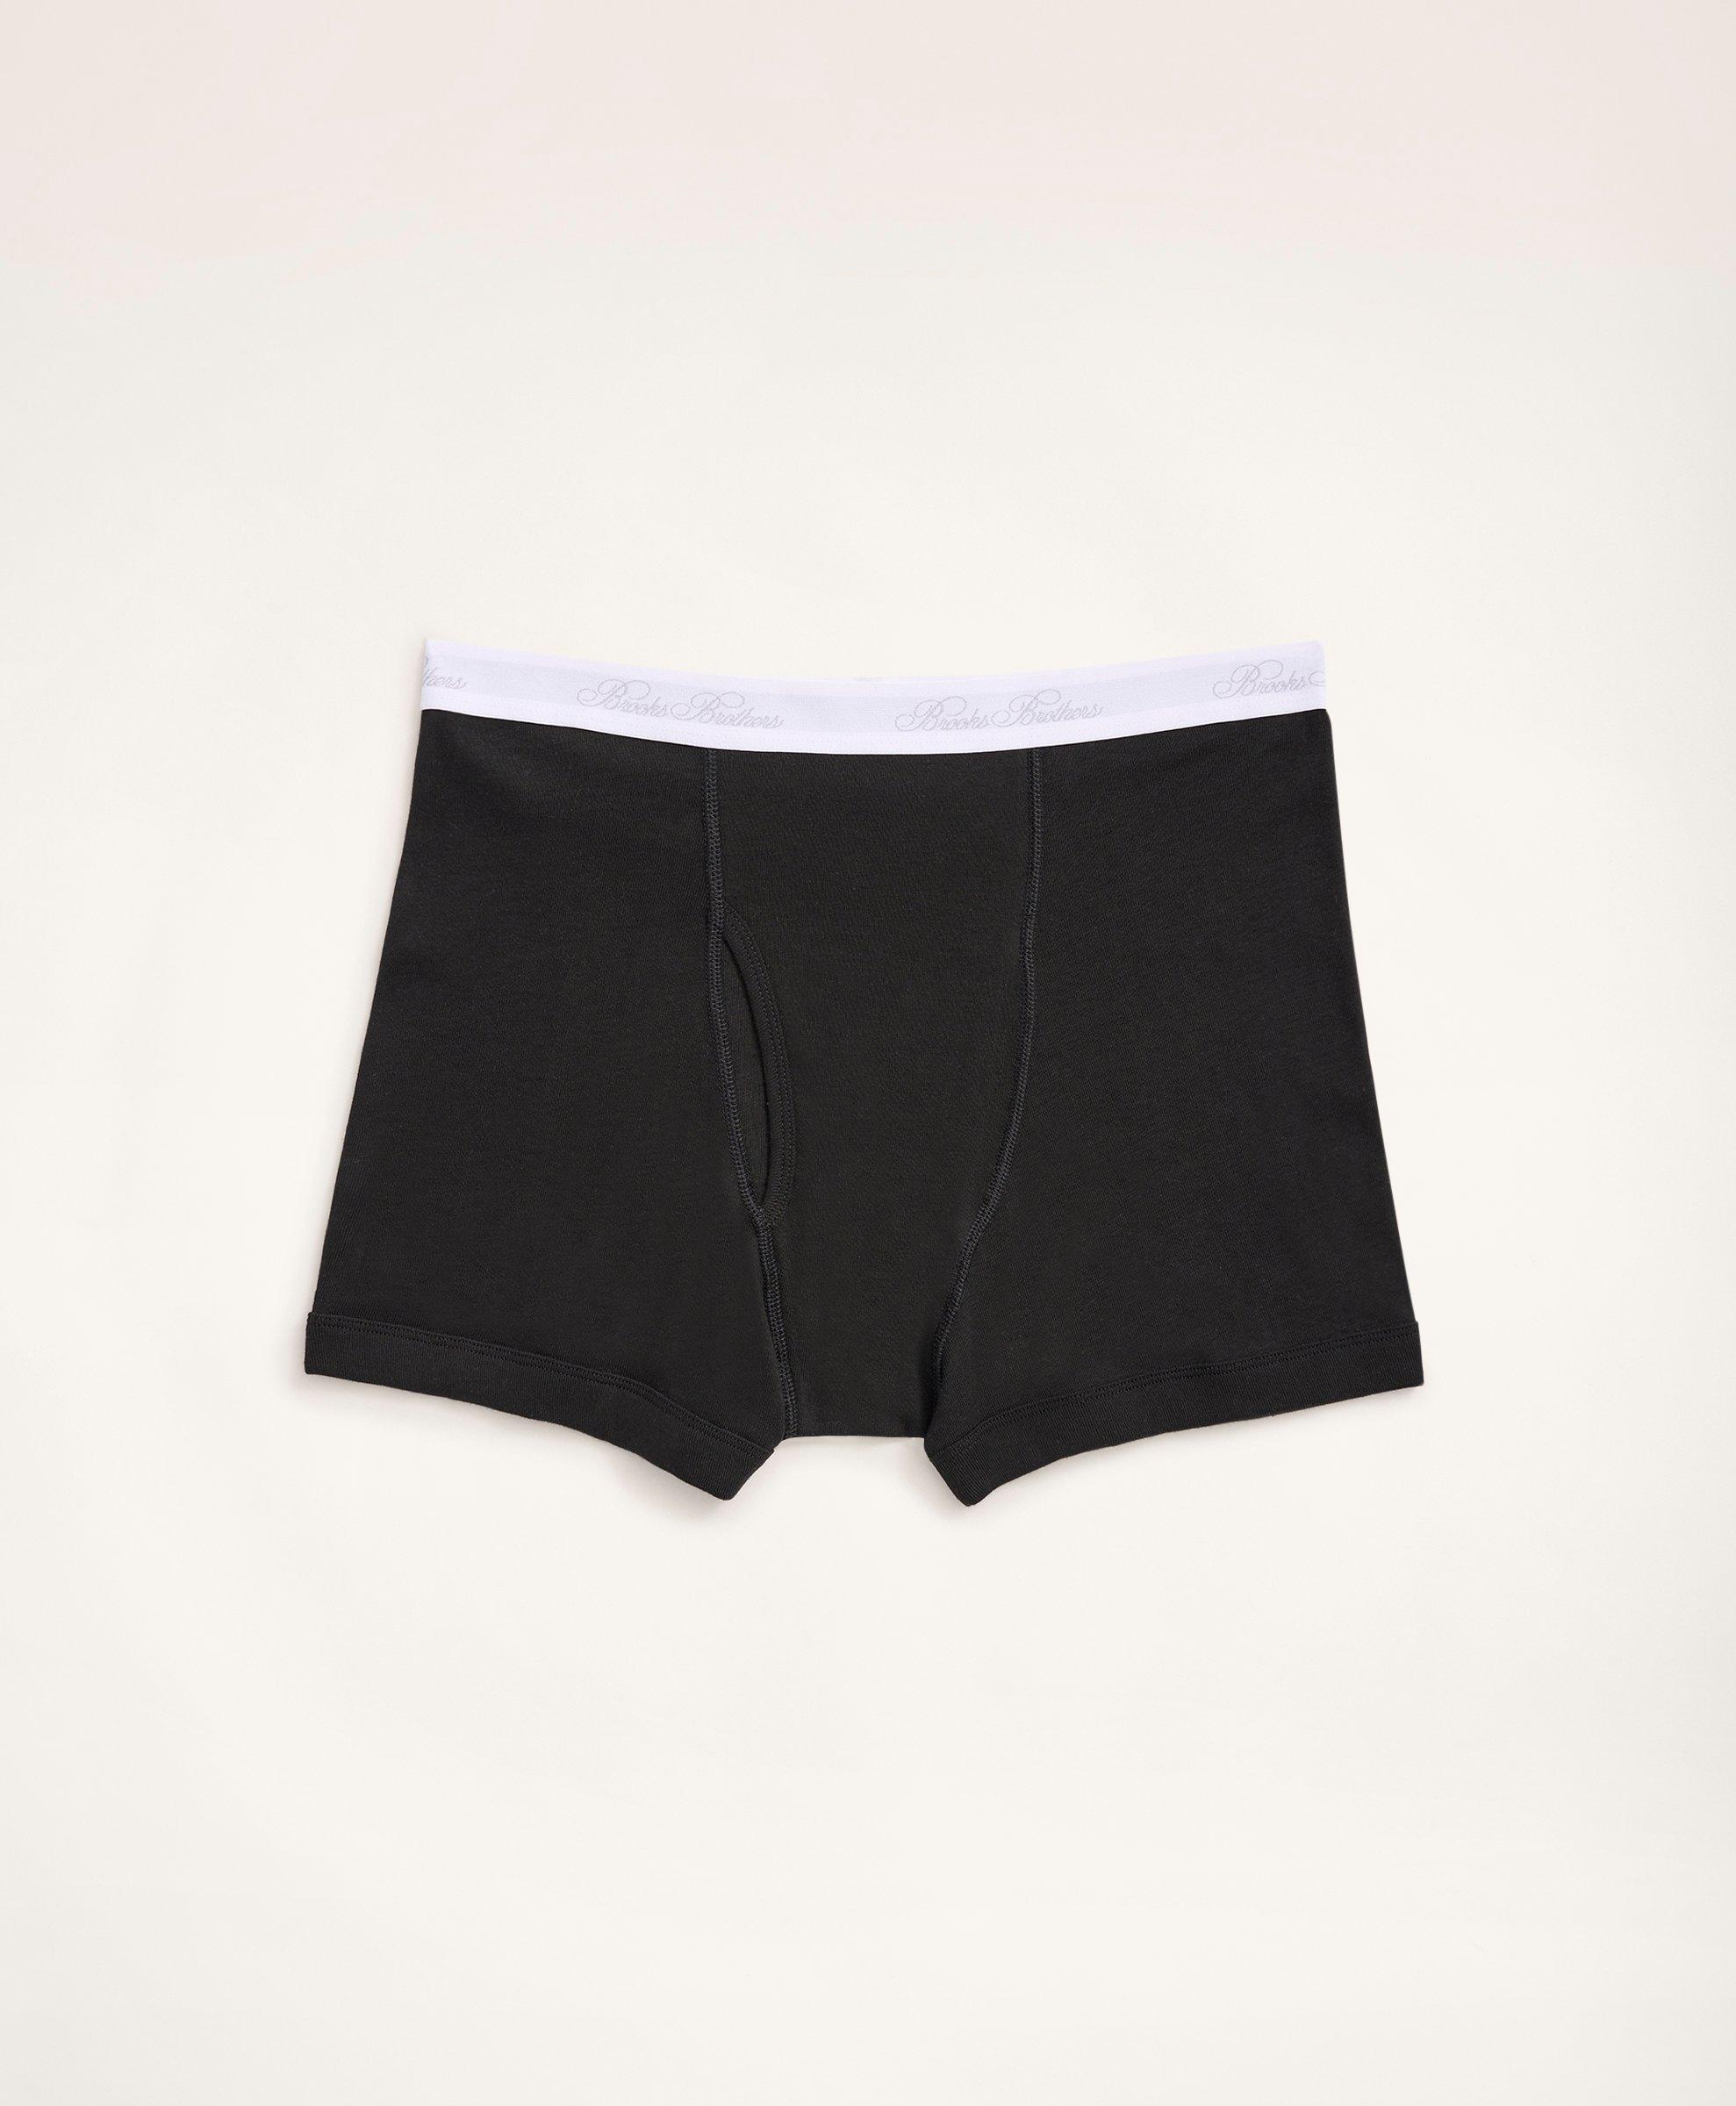 Shop Brooks Brothers Supima Cotton Boxer Briefs - 3 Pack | Black | Size Small